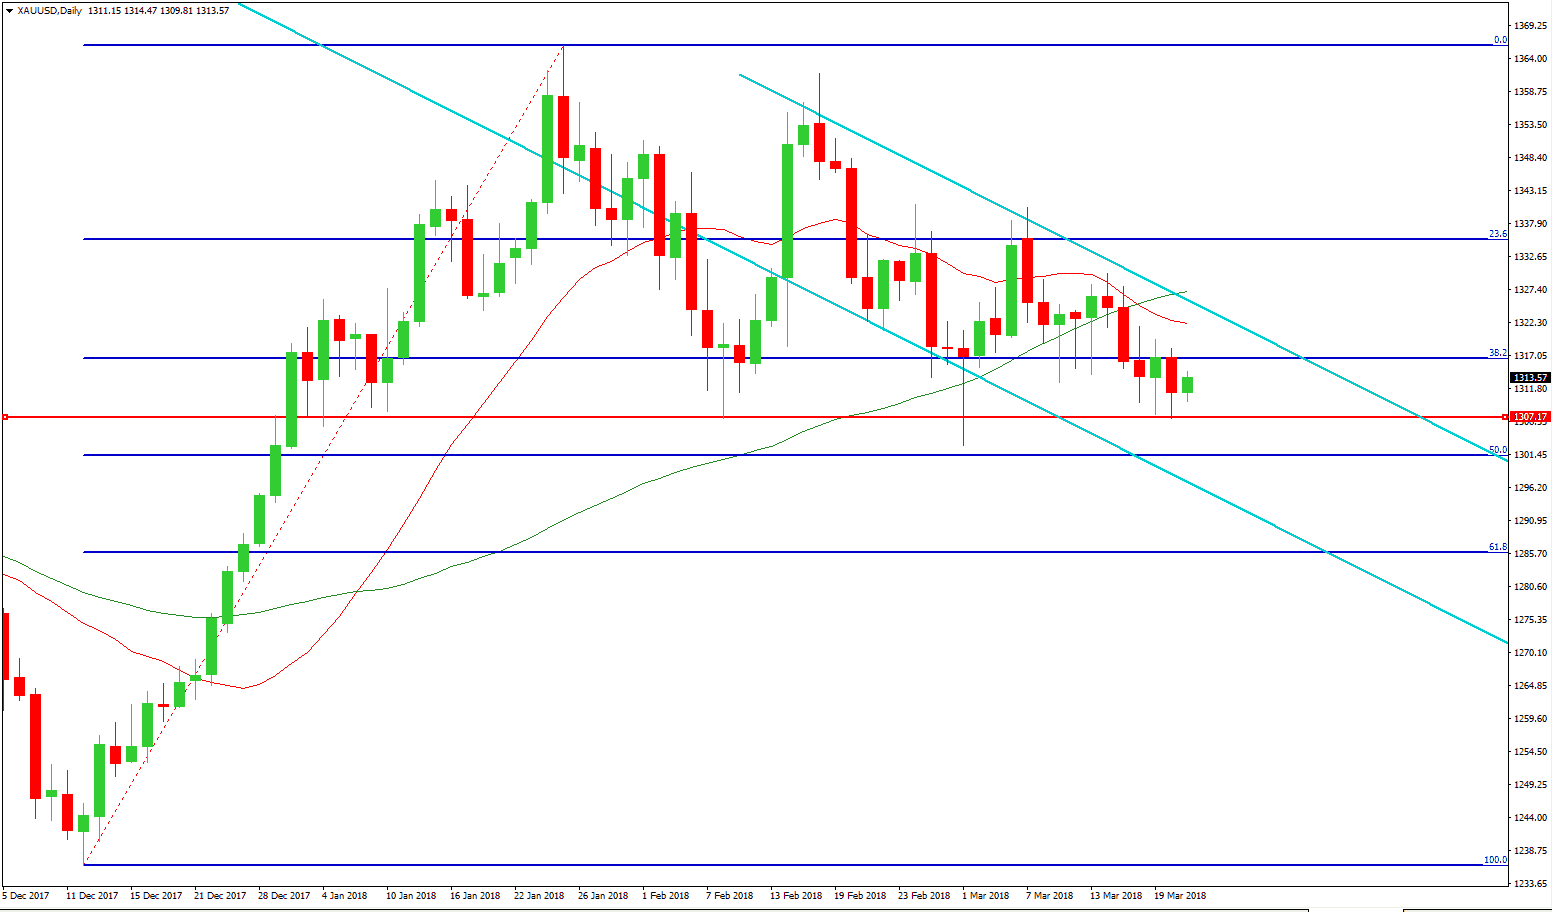 Gold Finds Support at the 2015 High Ahead of FOMC